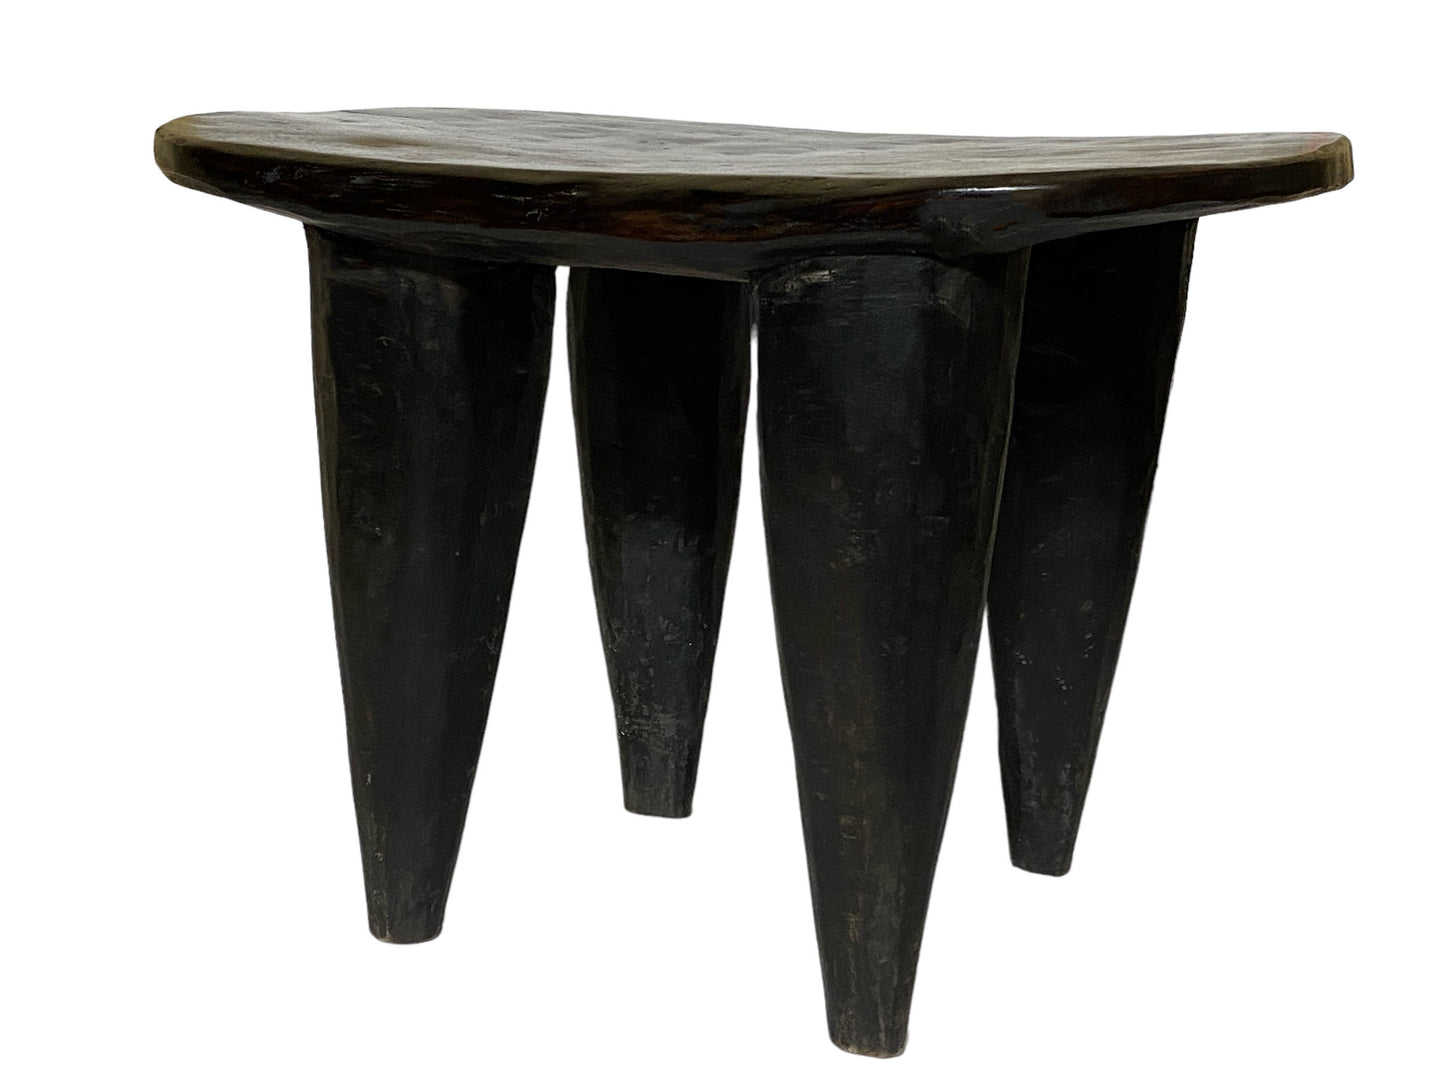 # 5916 African Carved Wood Senufo Table/Stool 27" W